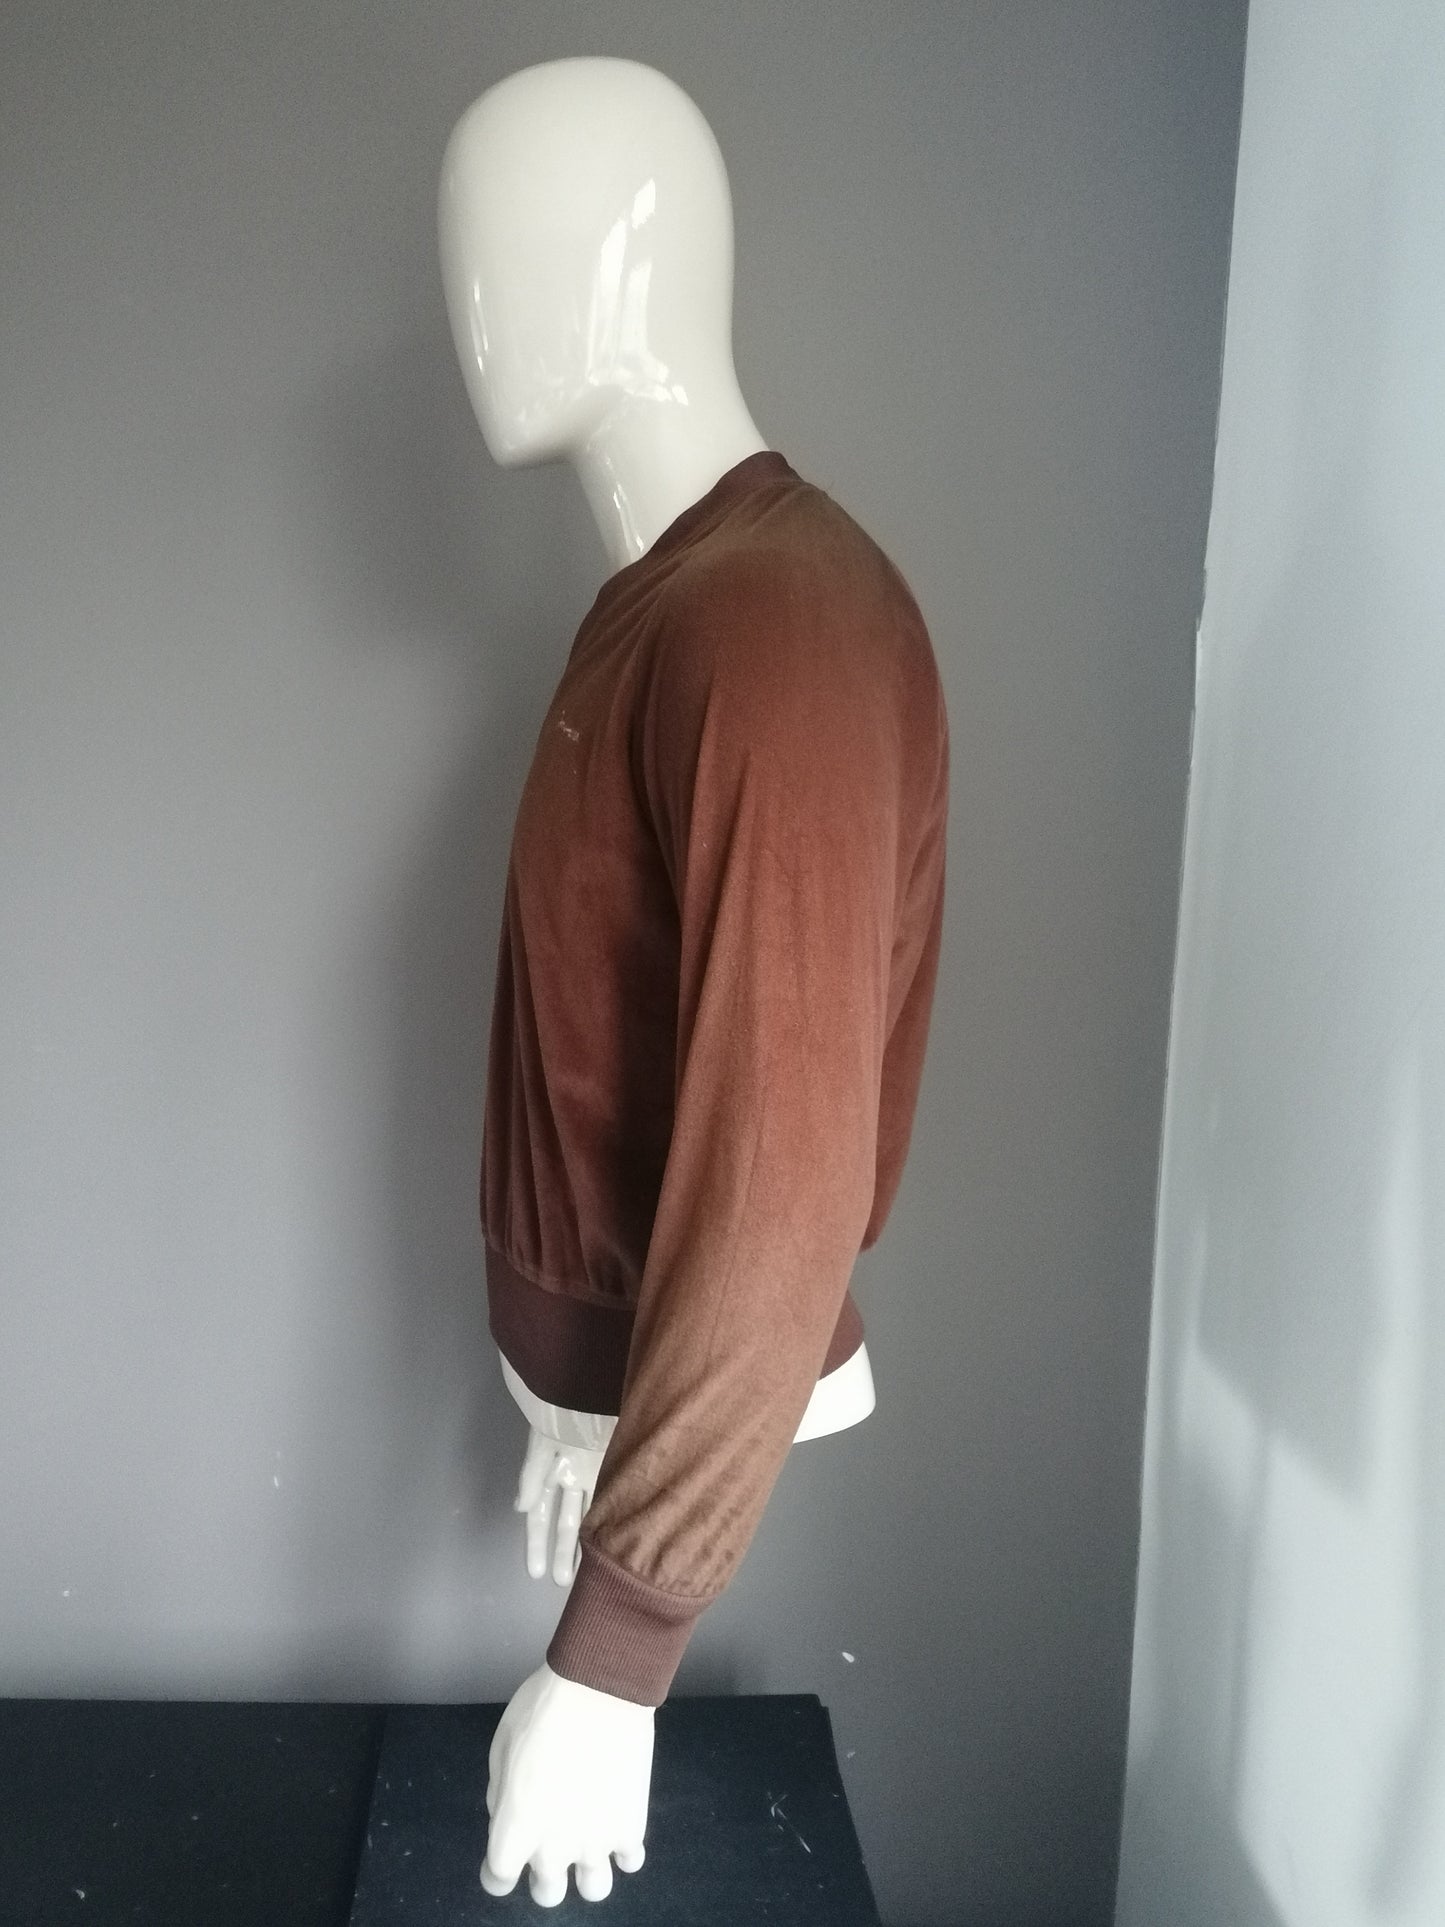 Tommy Aaron Velvet / velor sweater with V-neck. Brown colored. Size S.